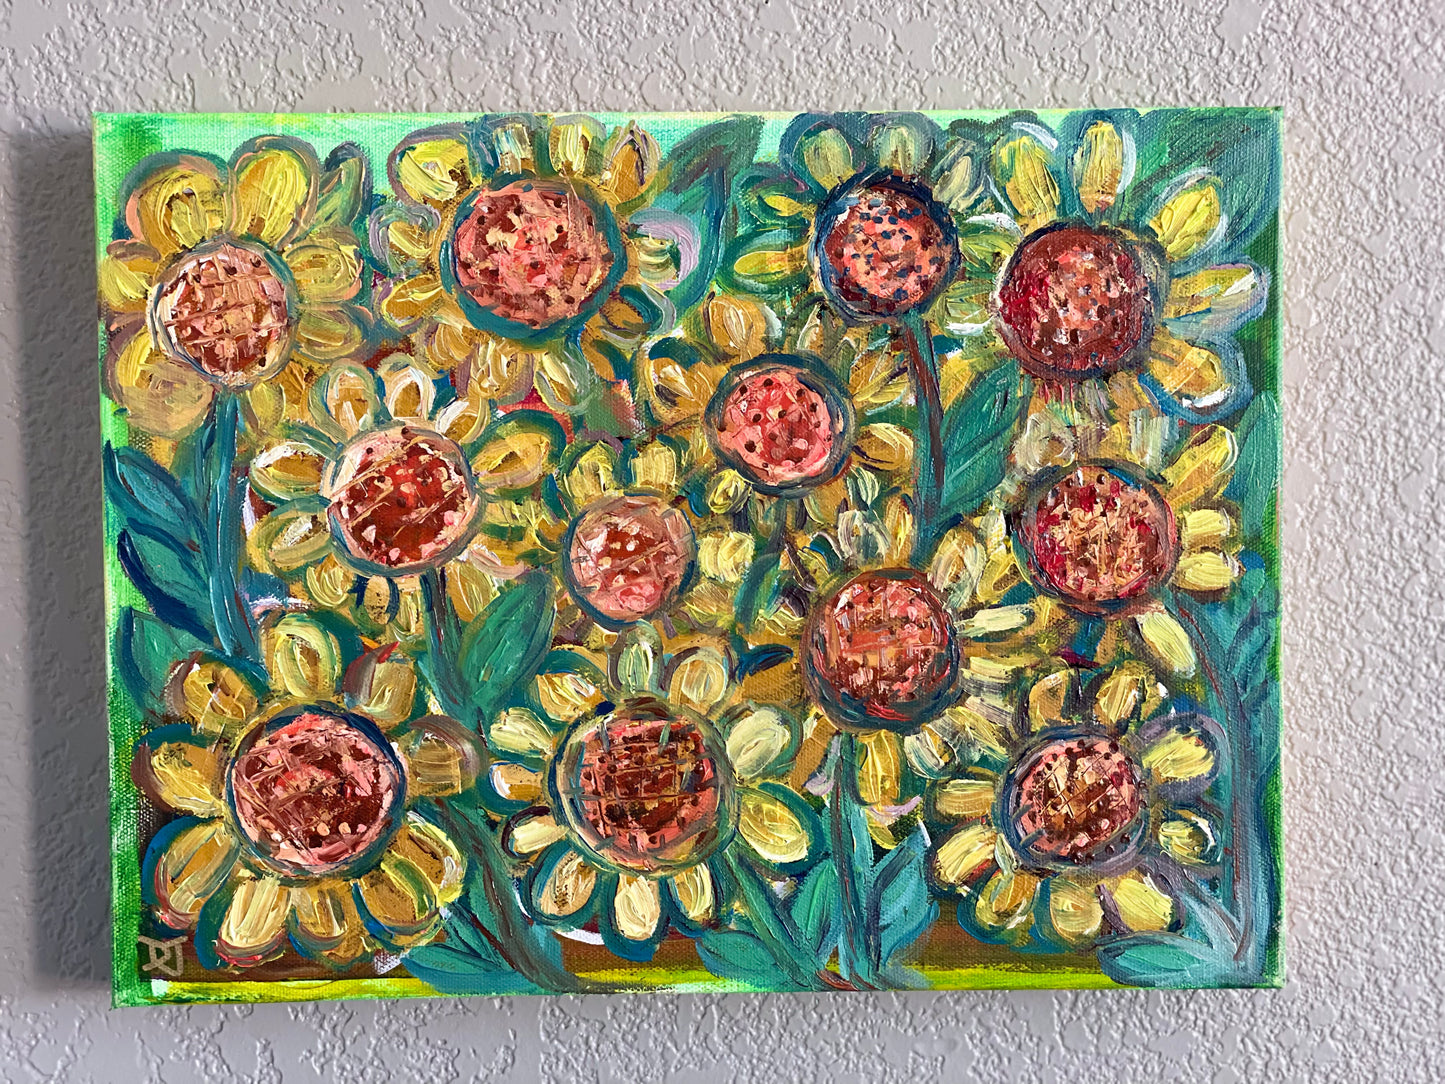 "Roadside Sunflowers" original oil painting by Dom Johnson